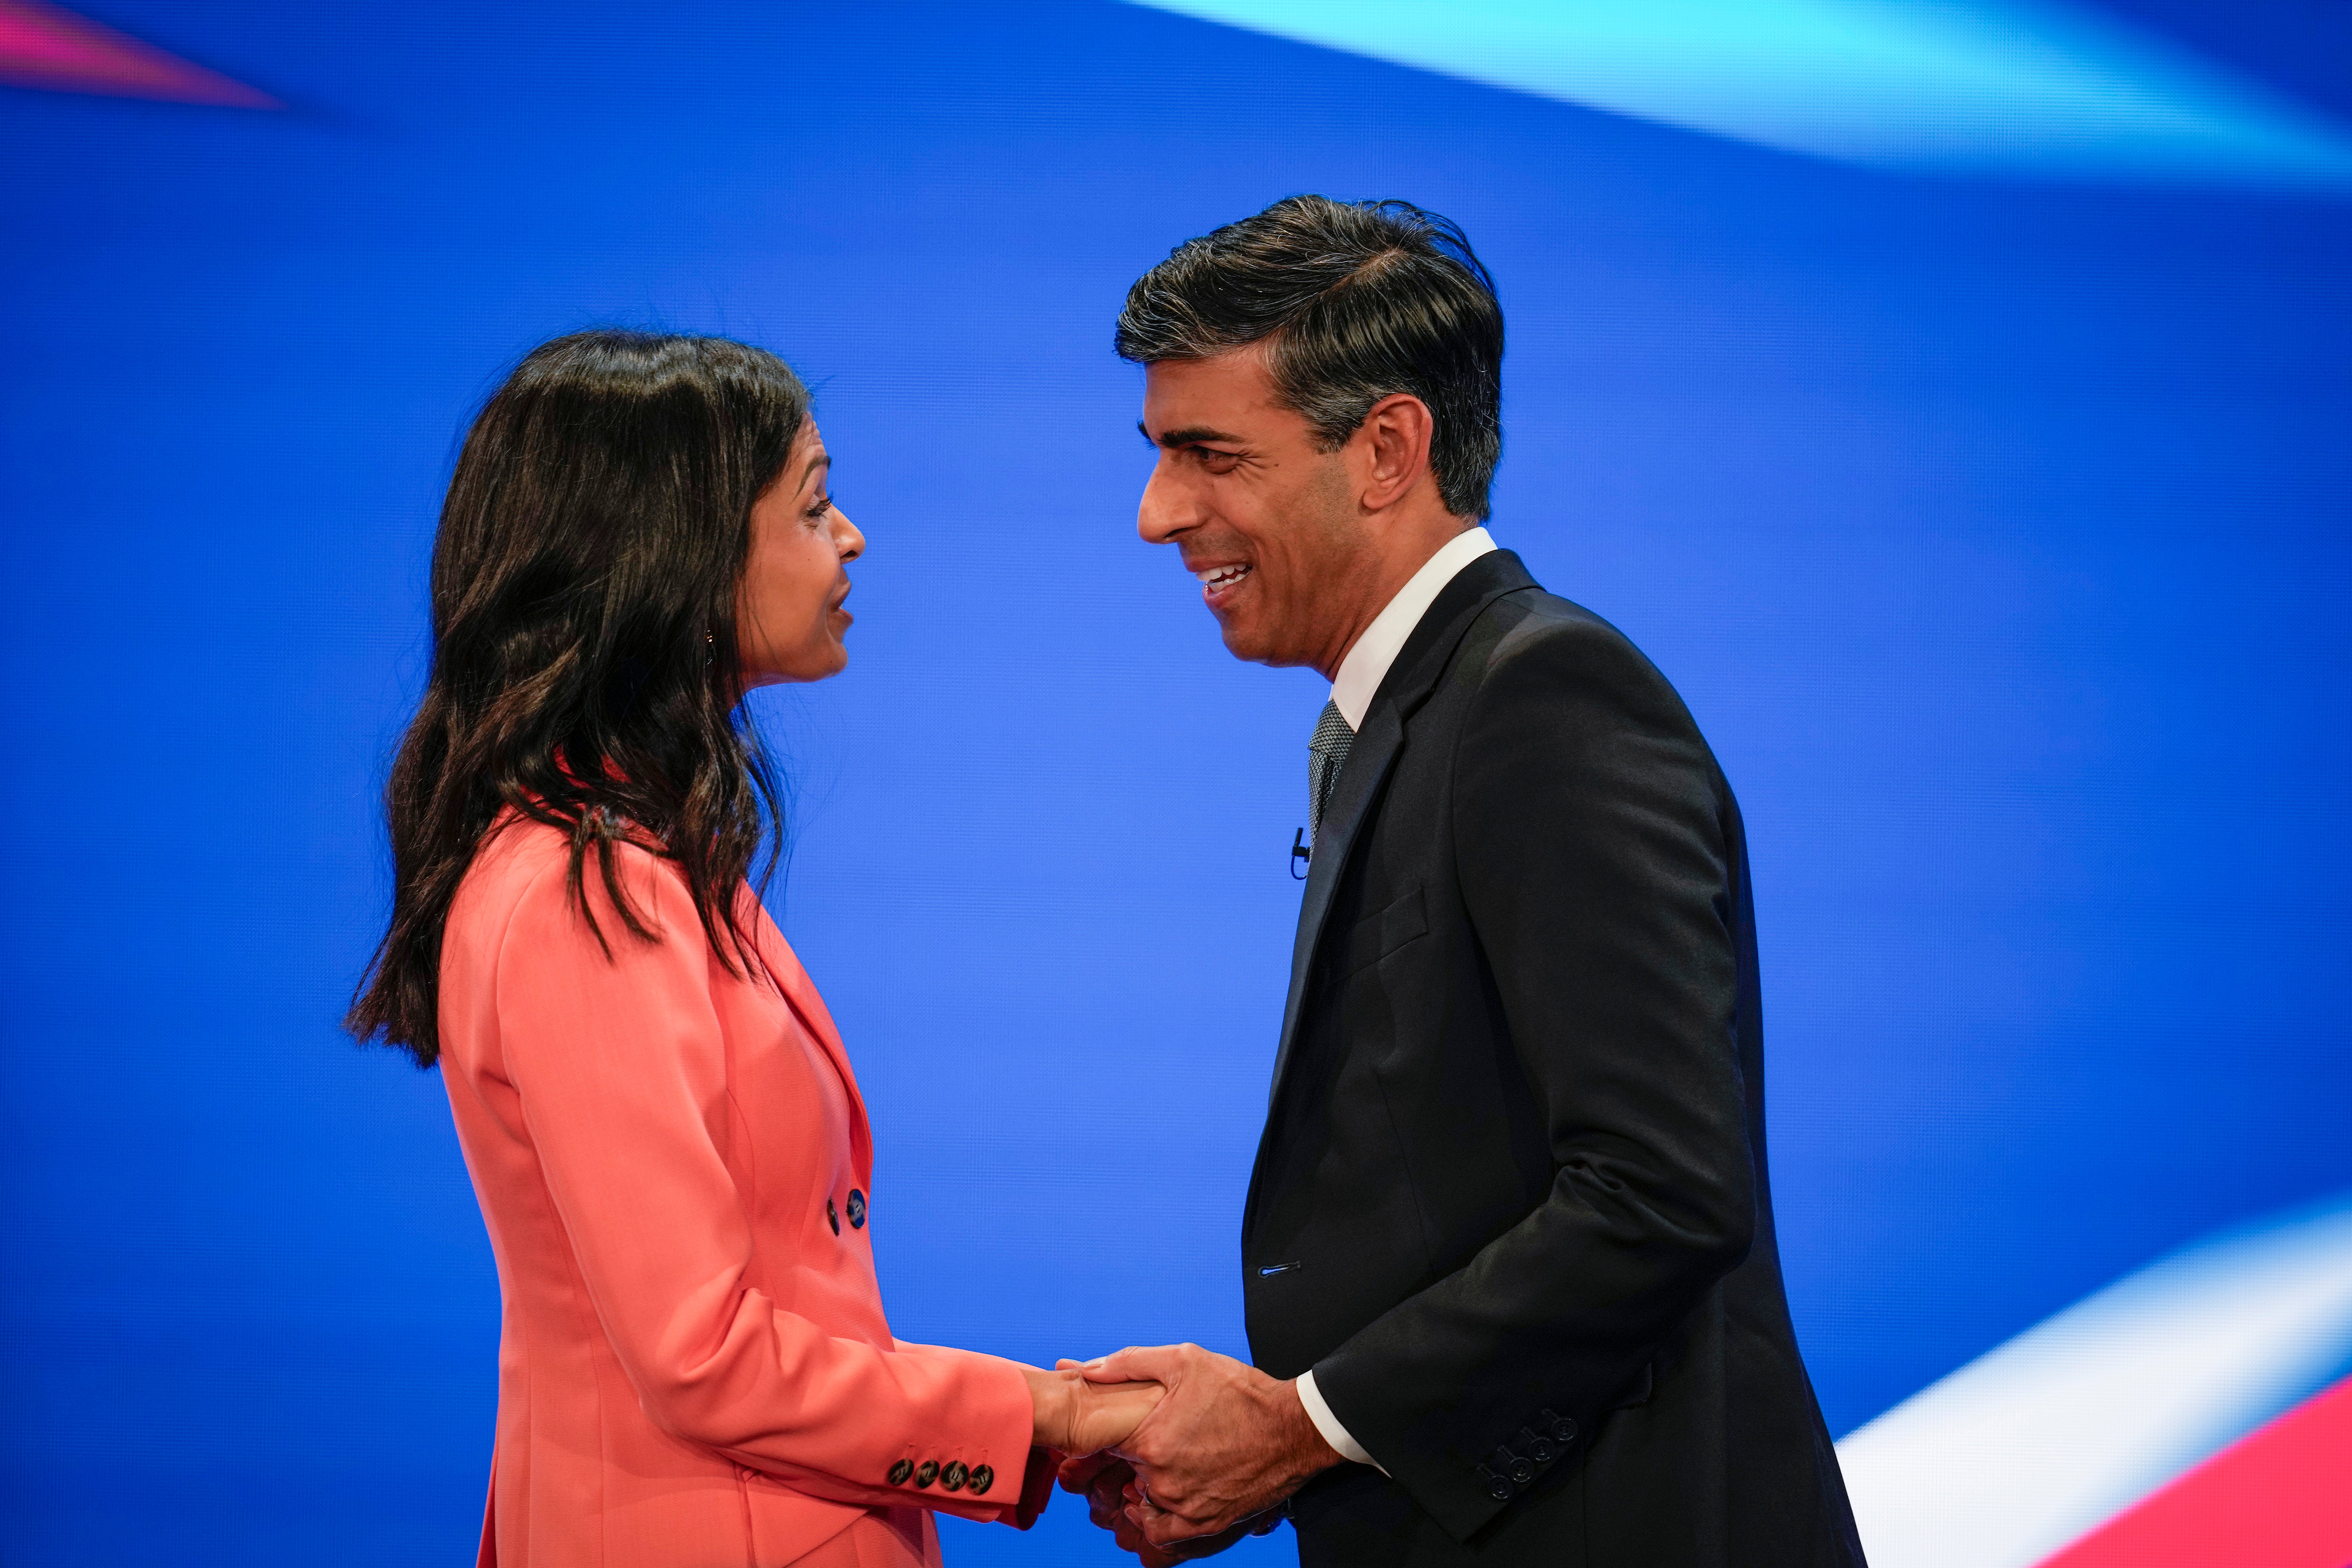 Akshata Murty embraces Rishi Sunak on stage at the final day of the Conservative Party Conference in Manchester